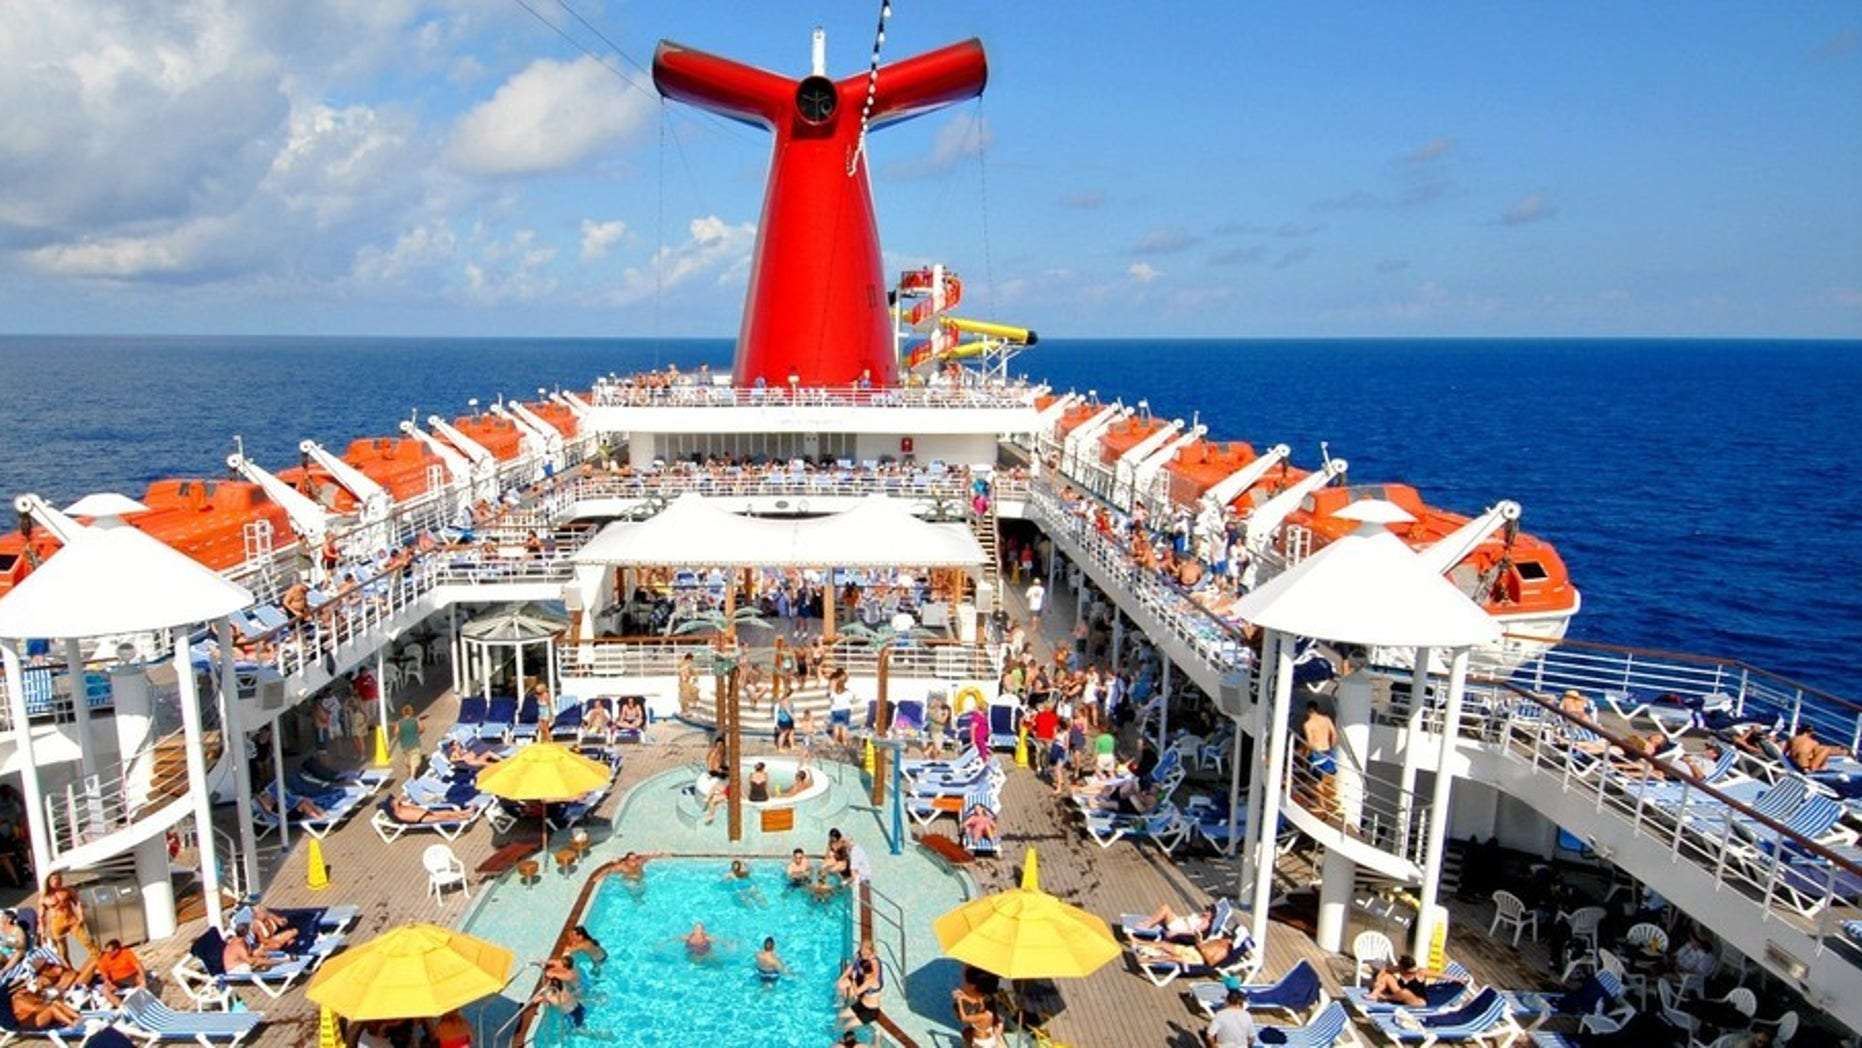 7 things to skip on a Carnival cruise ship